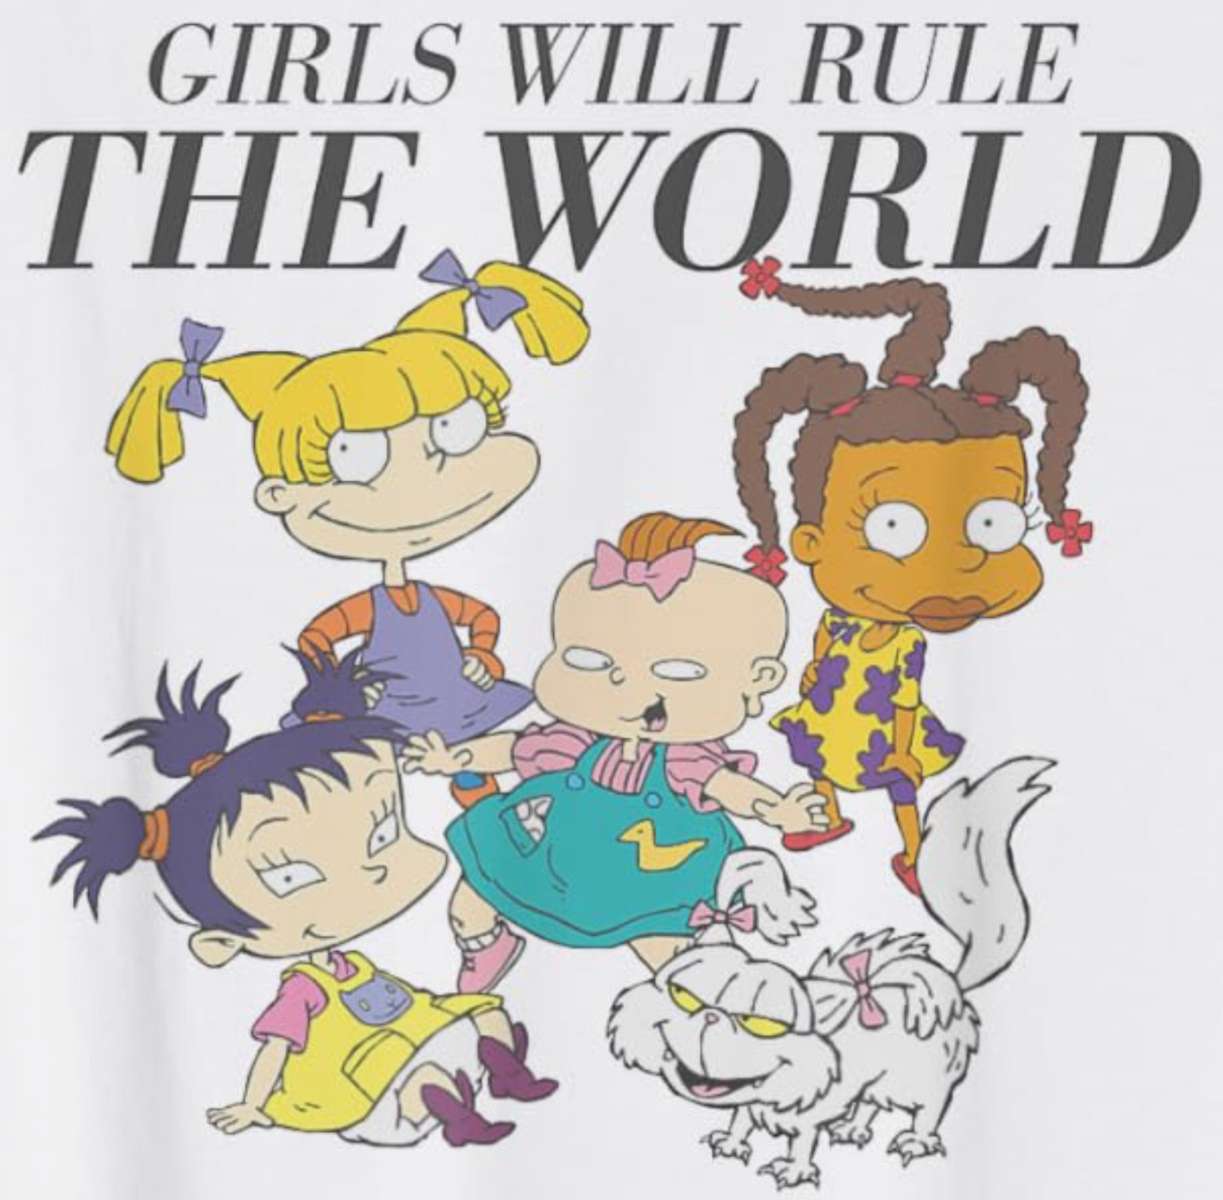 Rugrats Group Girls Will Rule The World online puzzle